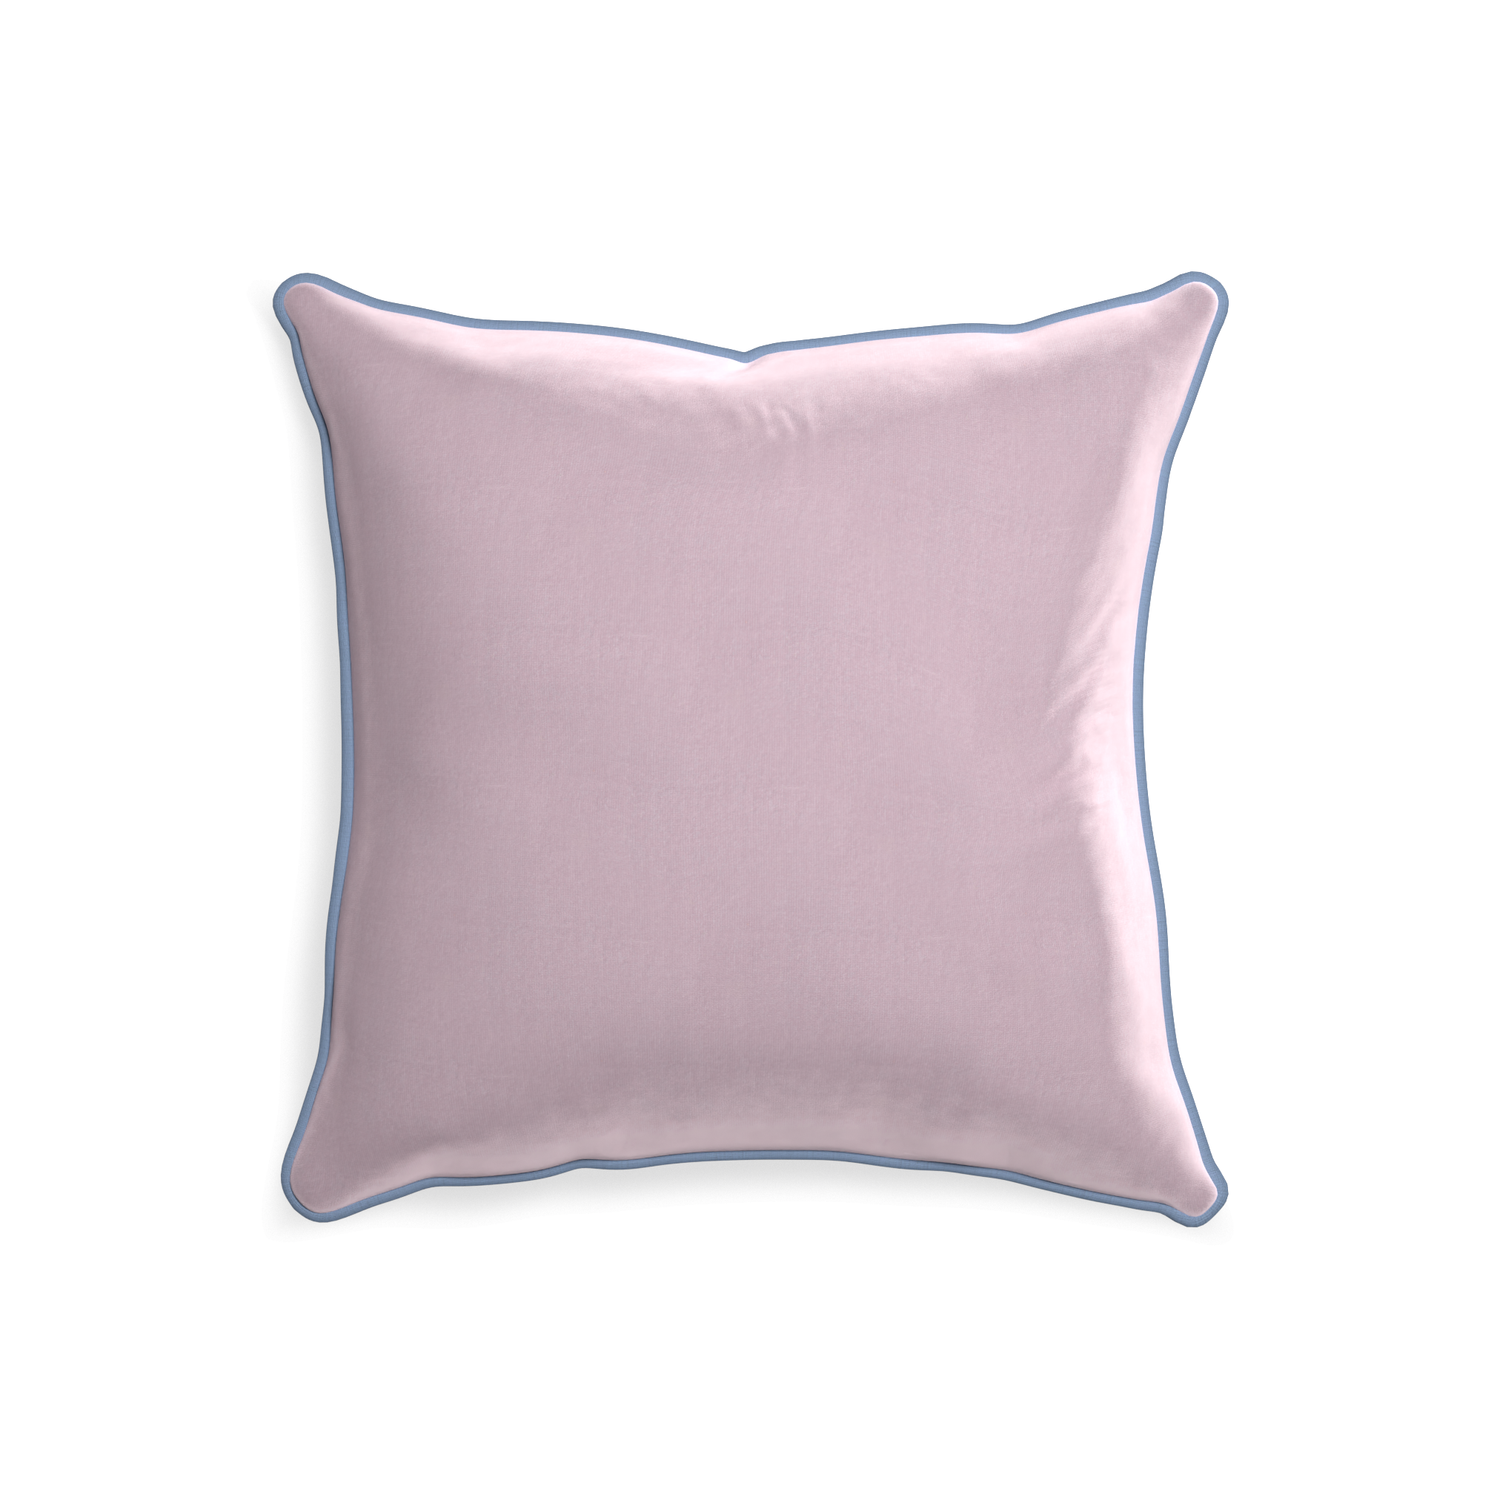 20-square lilac velvet custom pillow with sky piping on white background